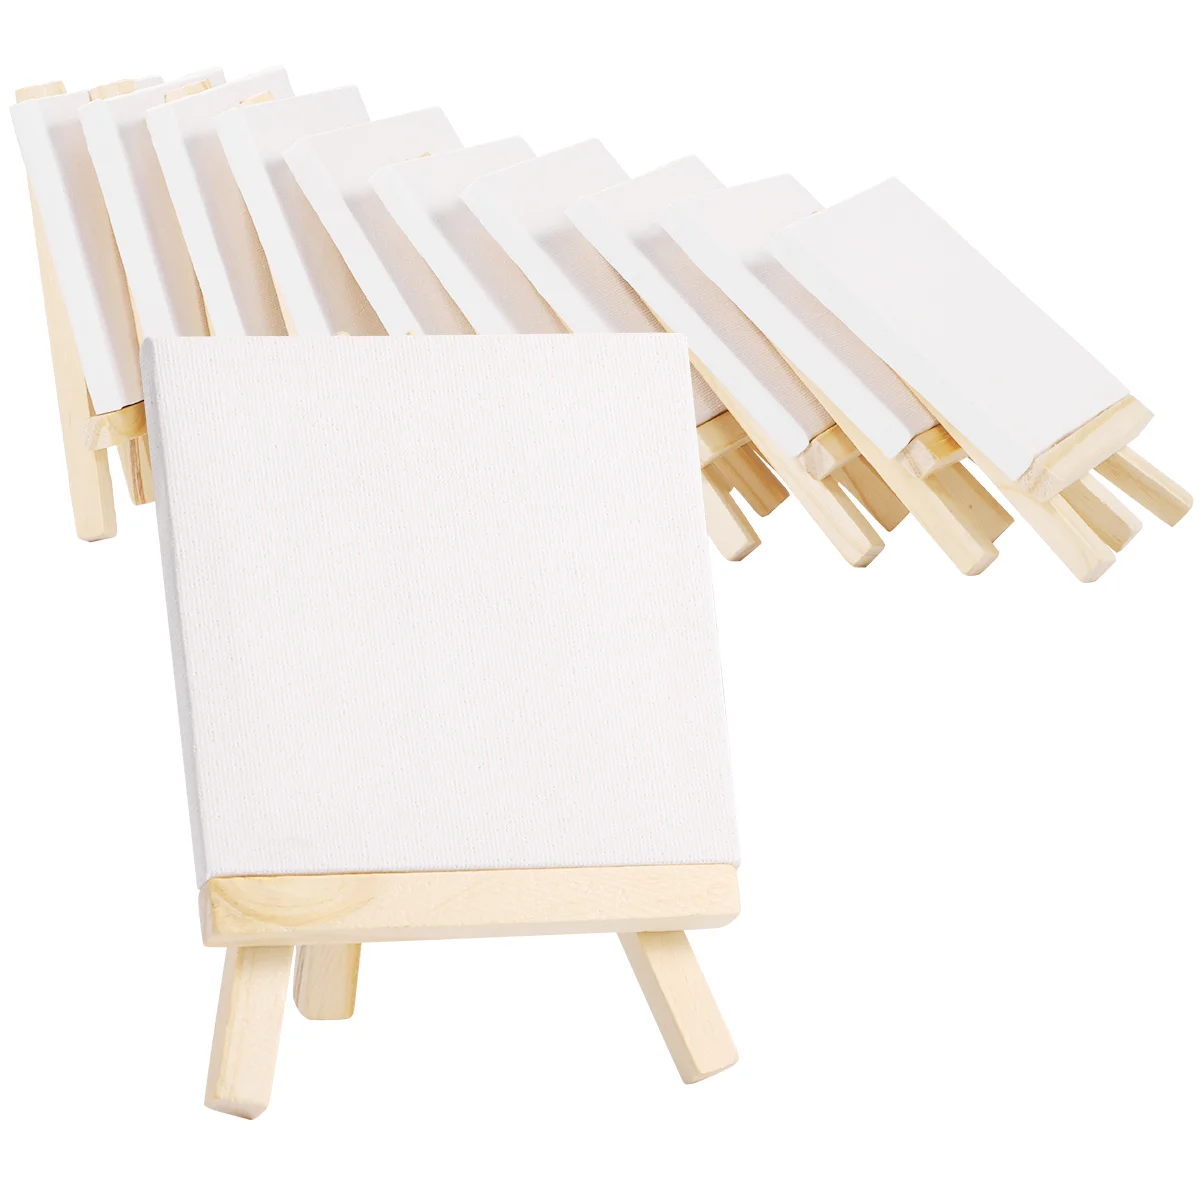 

SUPVOX 10 Sets Canvas and Easel Durable Versatile Mini Practical Painting Set Display Easels for Art Decoration Painting